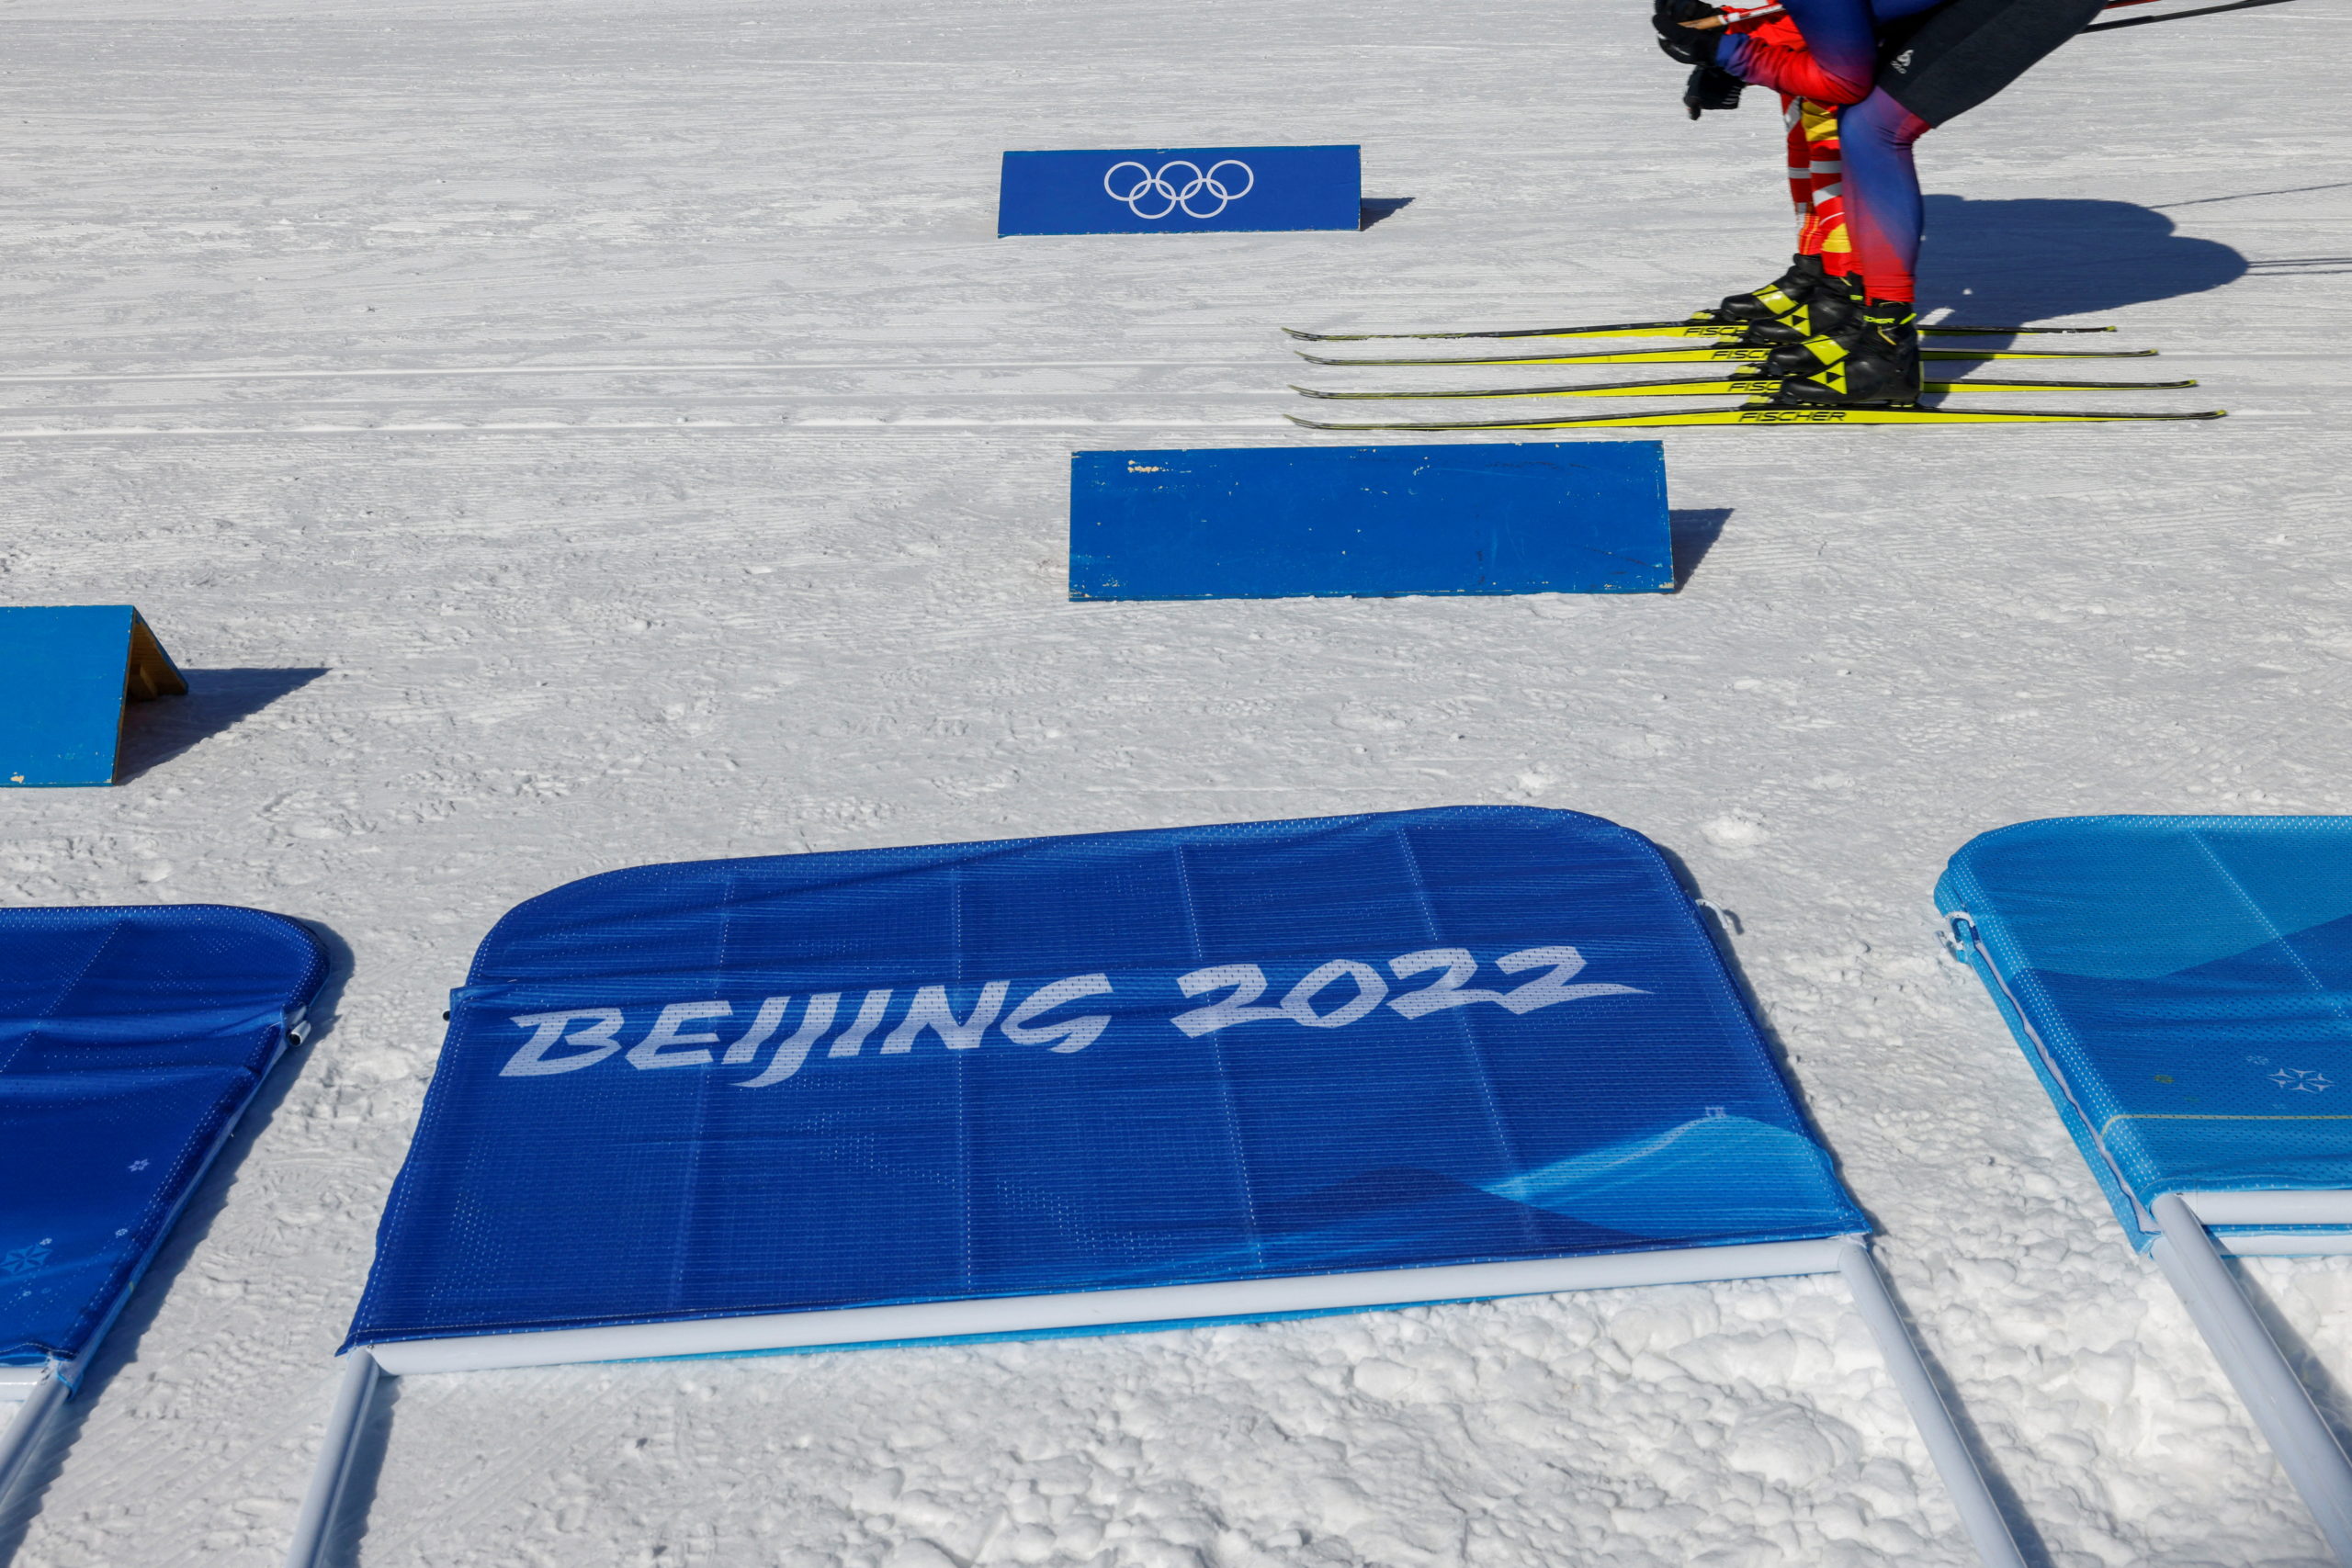 Athletes attend a non-completion training at the National Biathlon Centre, ahead of the Beijing 2022 Winter Olympics in Zhangjiakou, China January 27, 2022. 